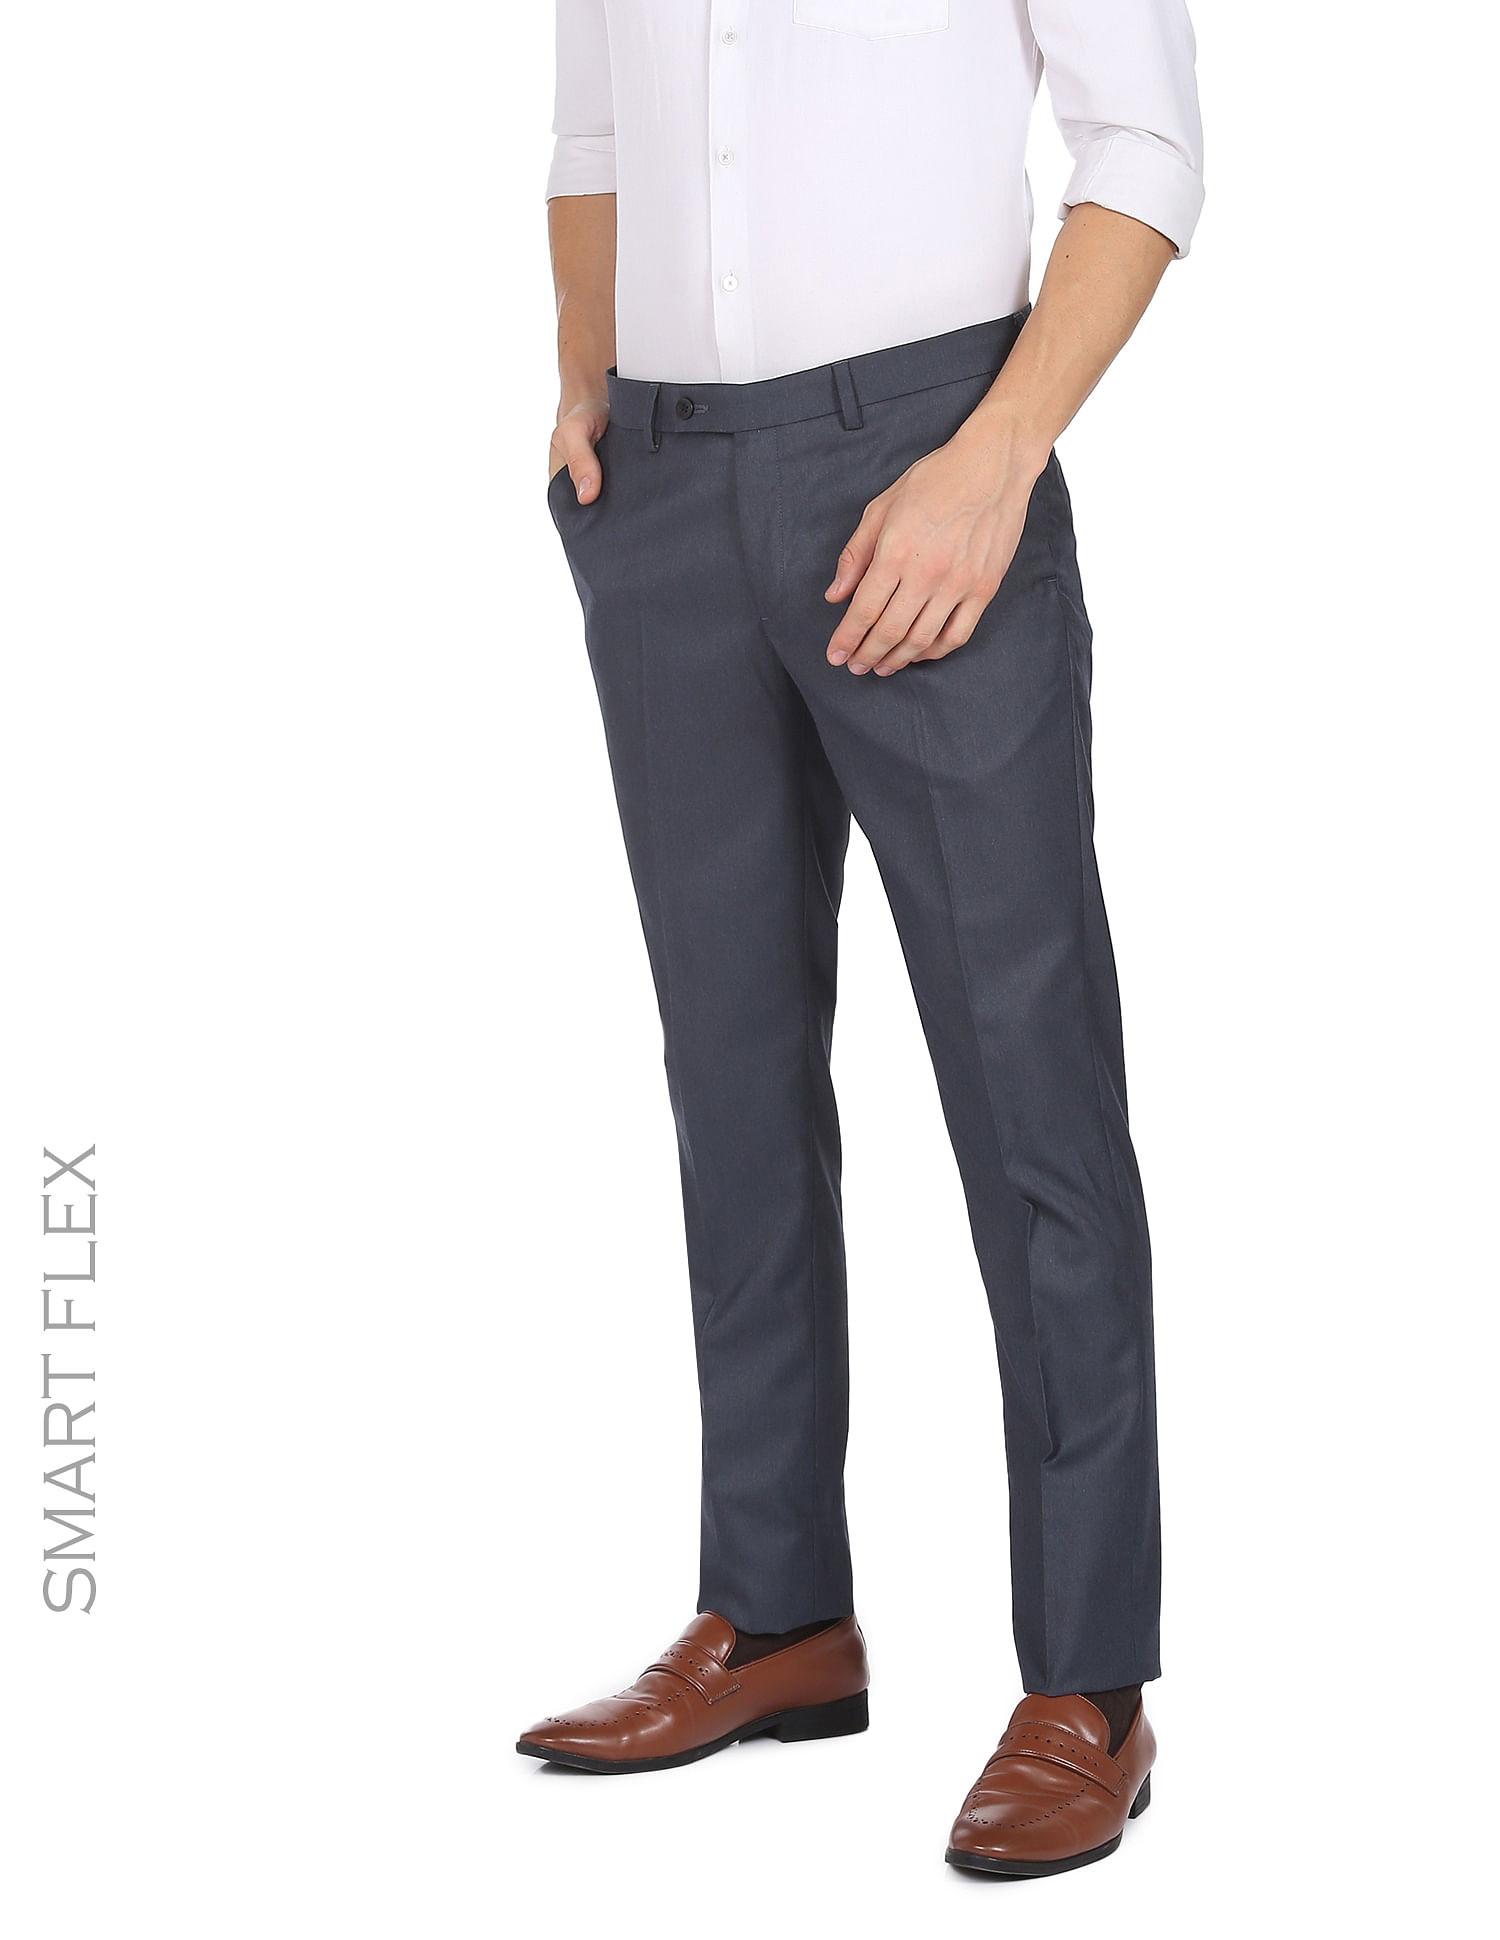 Buy Arrow Mid Rise Patterned Smart Flex Formal Trousers - NNNOW.com